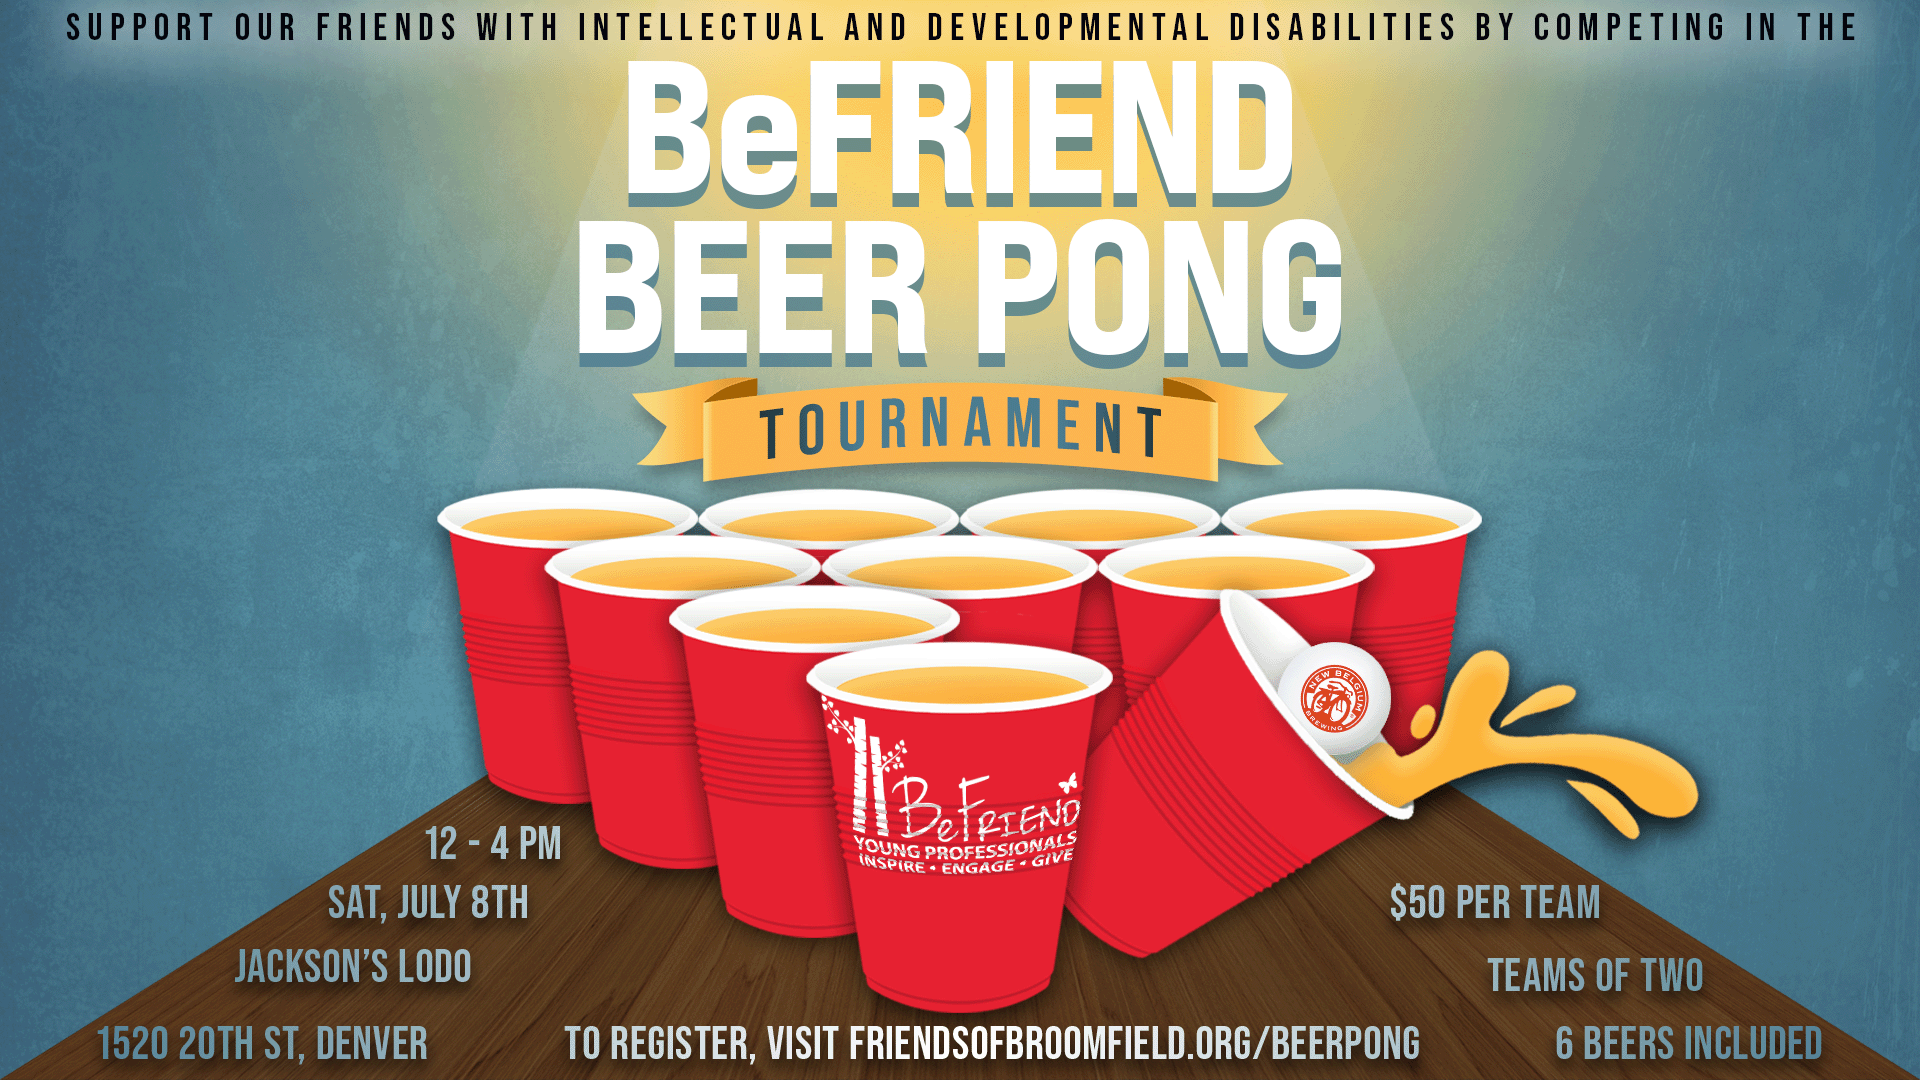 https://cdn.givecloud.co/s/files/1/0000/1462/files/beer-pong-tournament-flyer-nbb.png